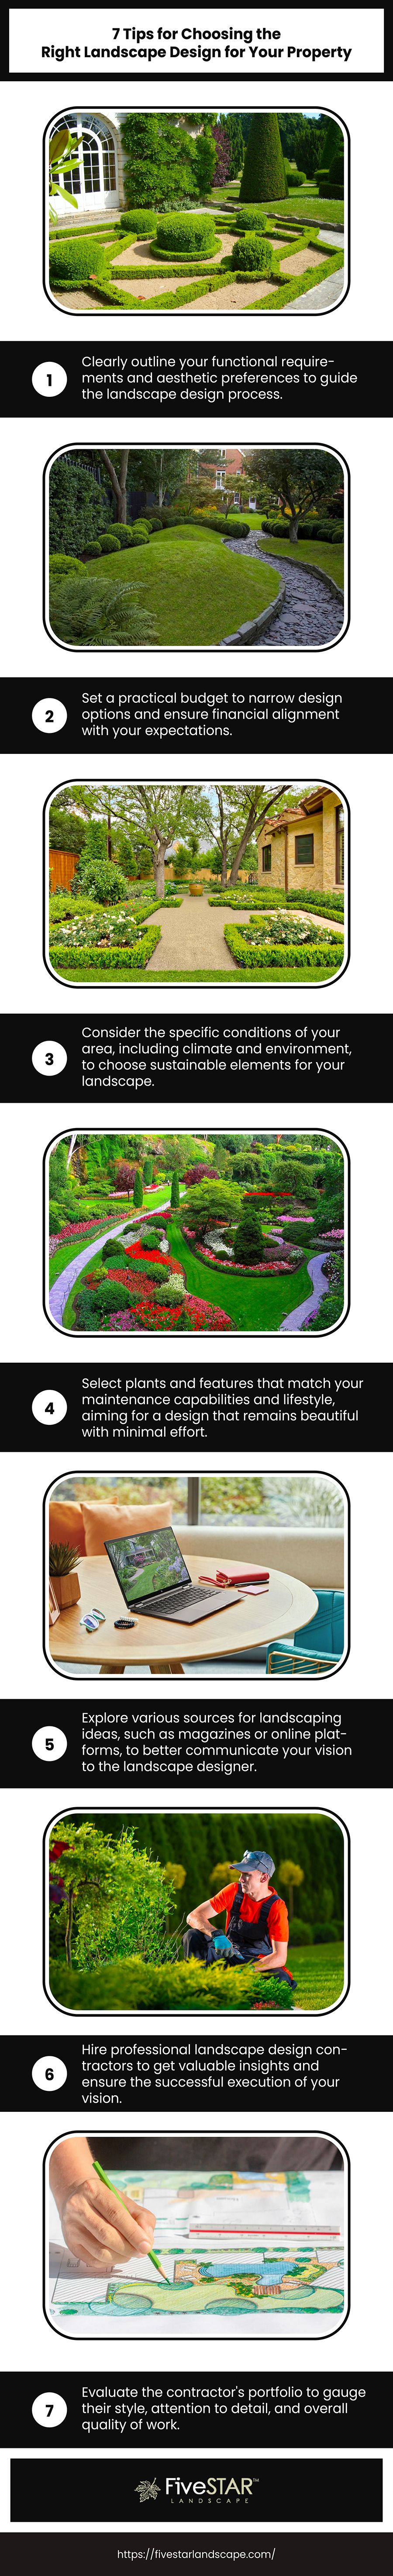 Tips for Choosing the Right Landscape Design for Your Property